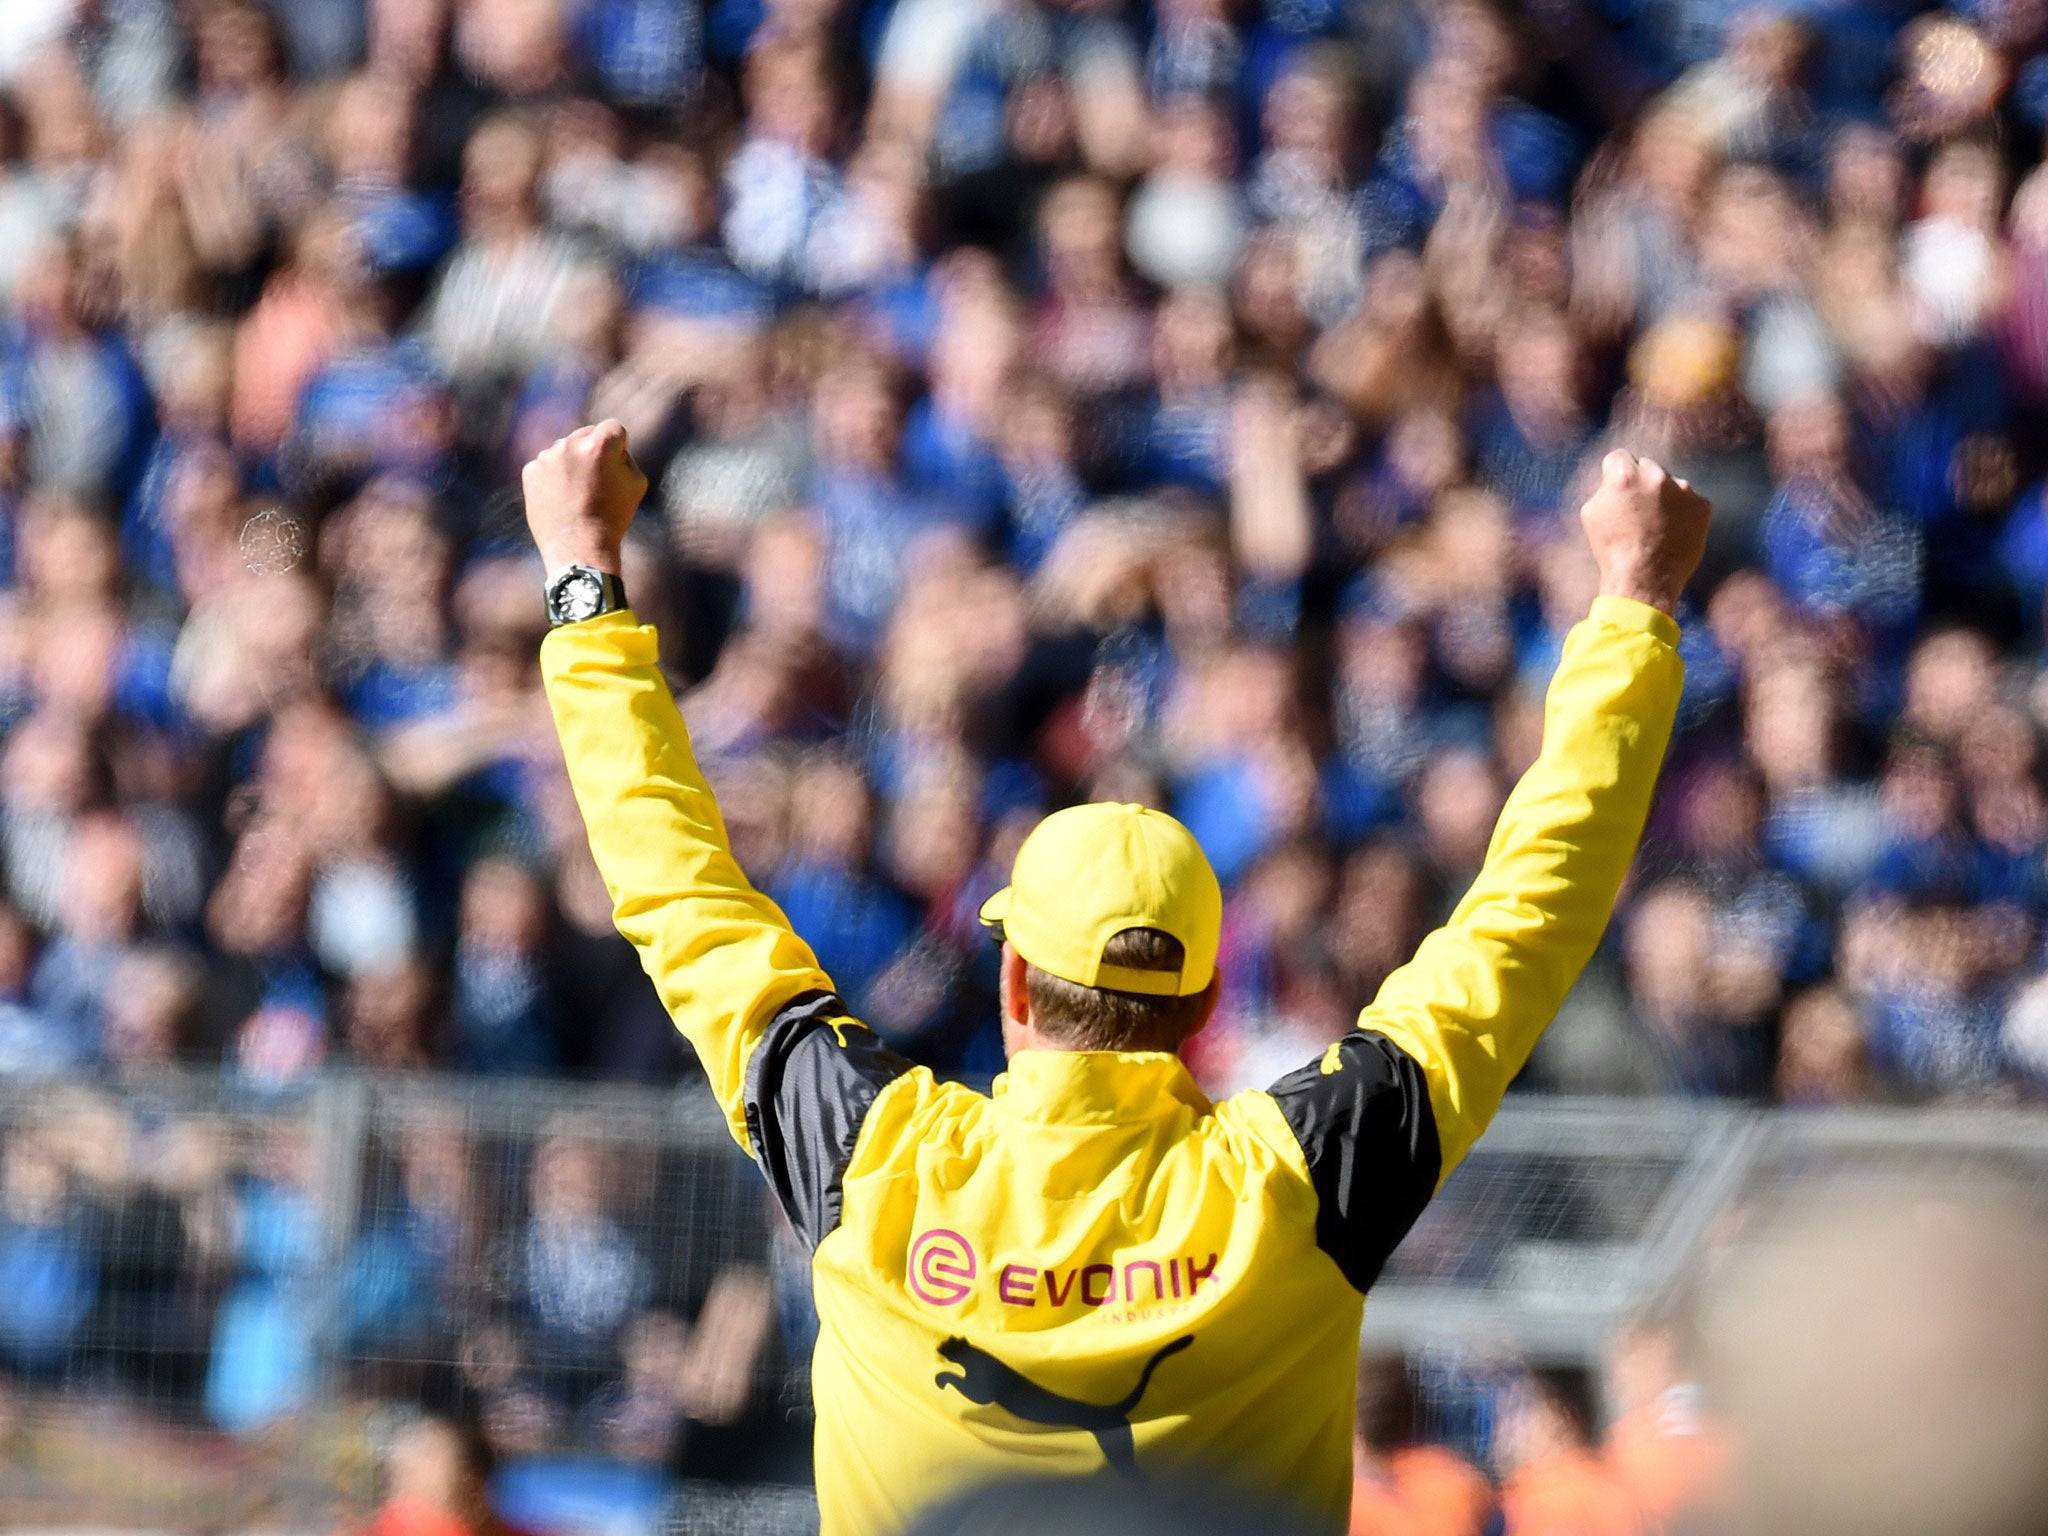 Klopp salutes the Dortmund crowd after announcing his resignation